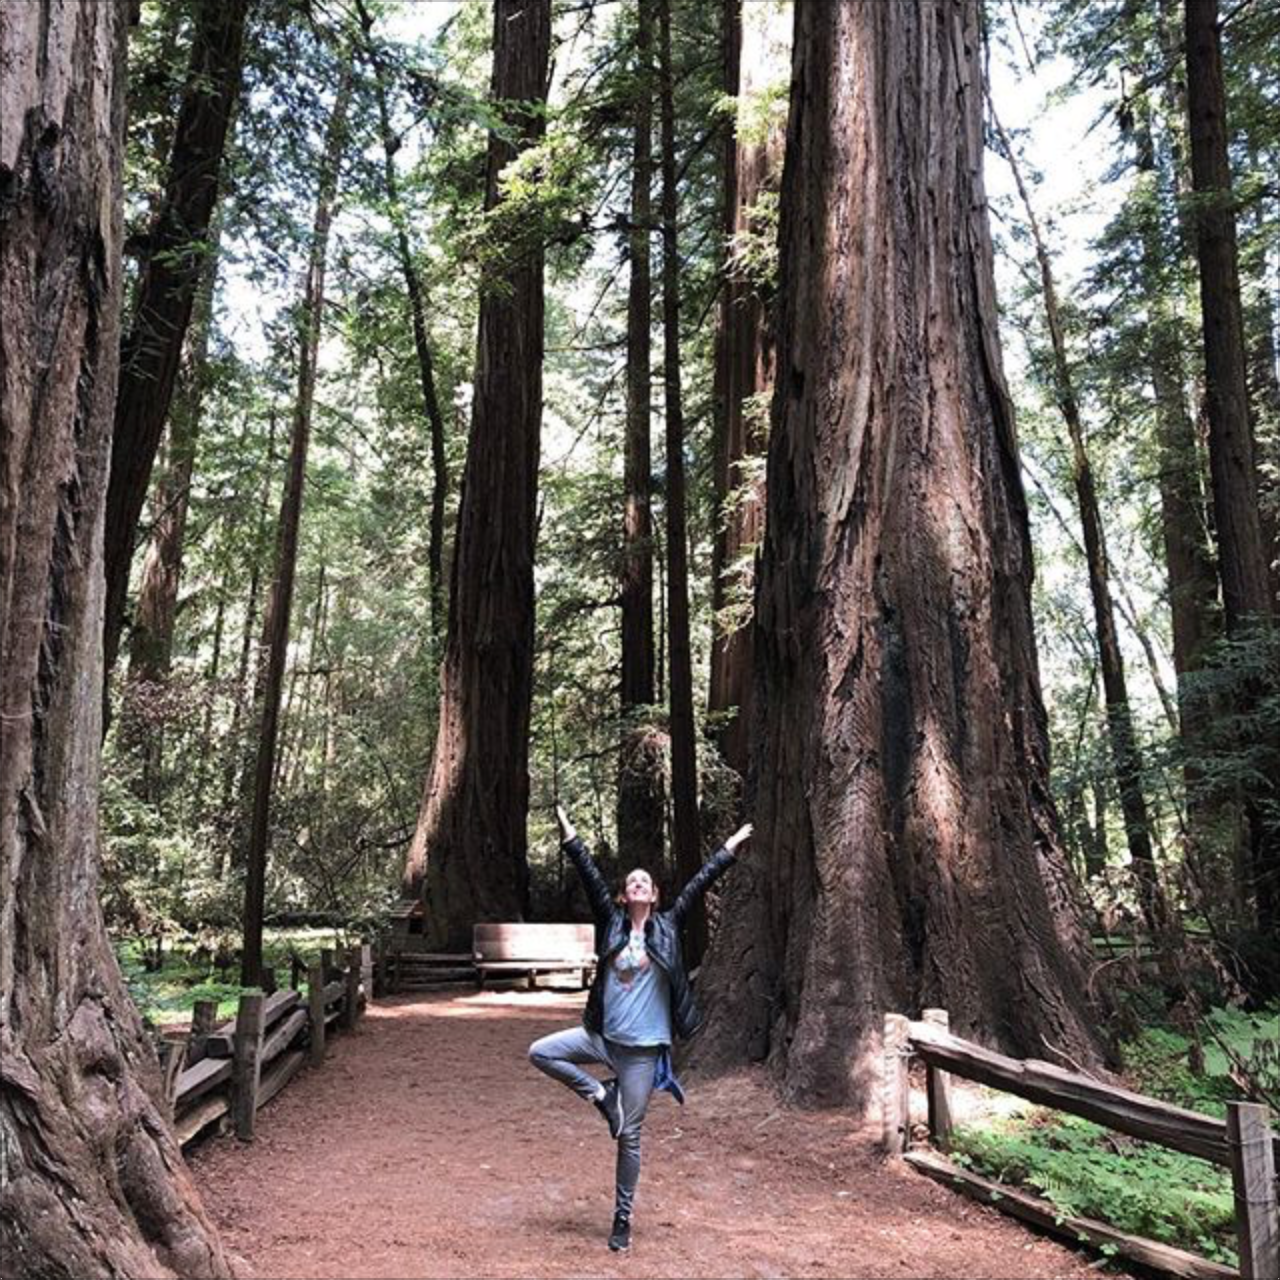 A woman does tree pose in the woods.